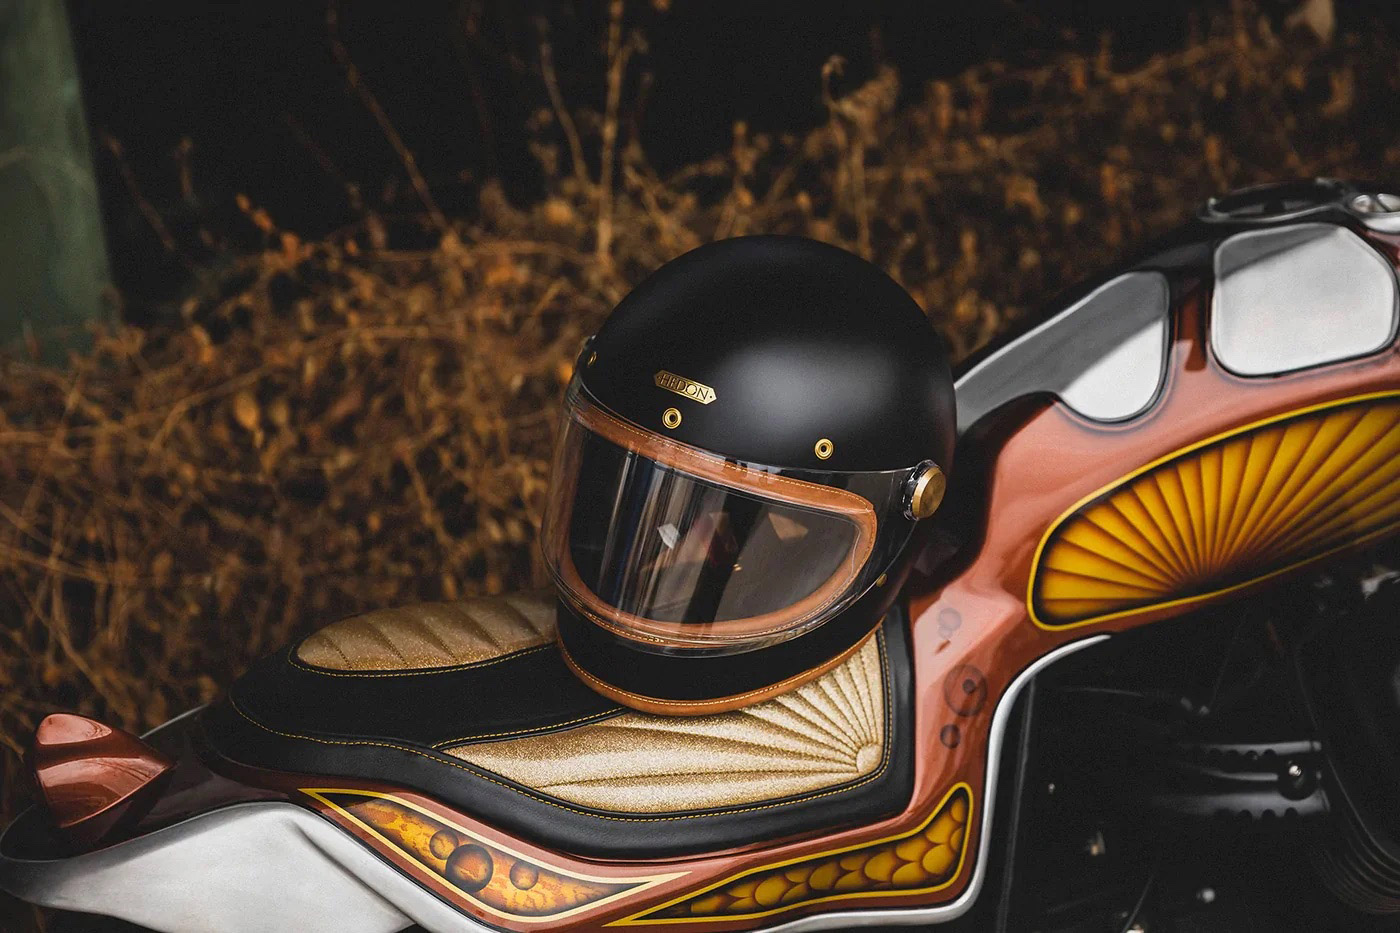 Motorcycle Helmets Sale at Revival Cycles